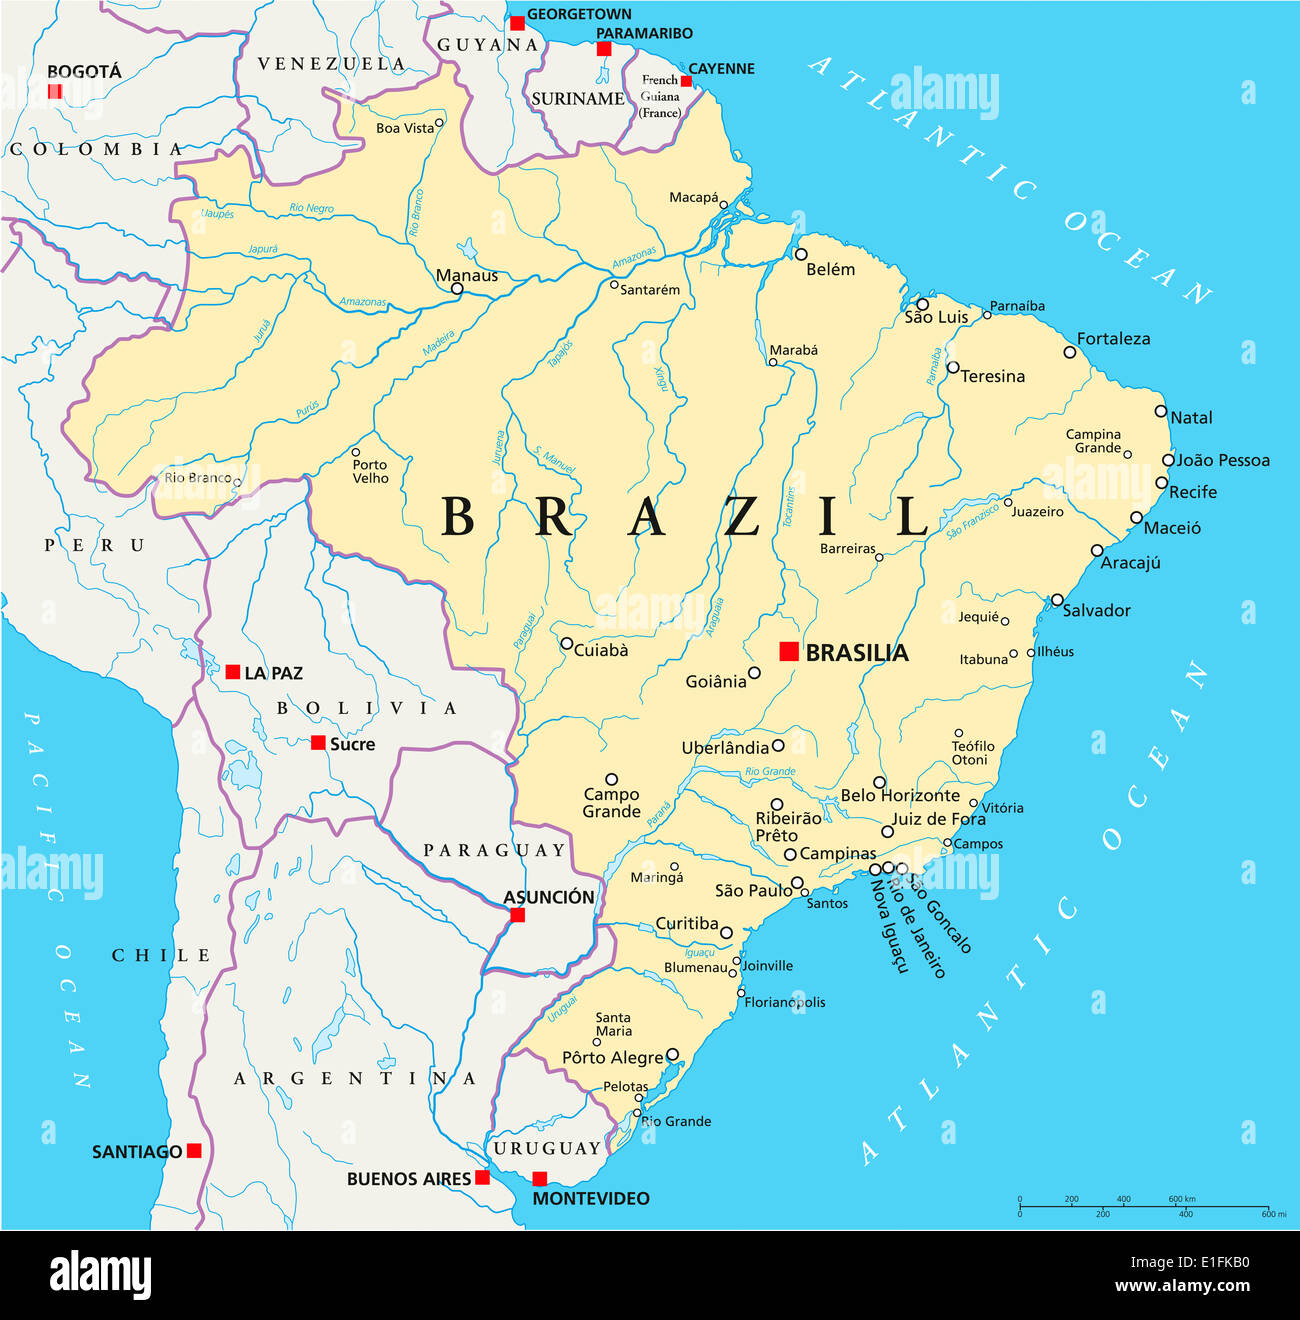 Brazil Political Map with capital Brasilia, national borders, most important cities, rivers and lakes. With English labeling. Stock Photo